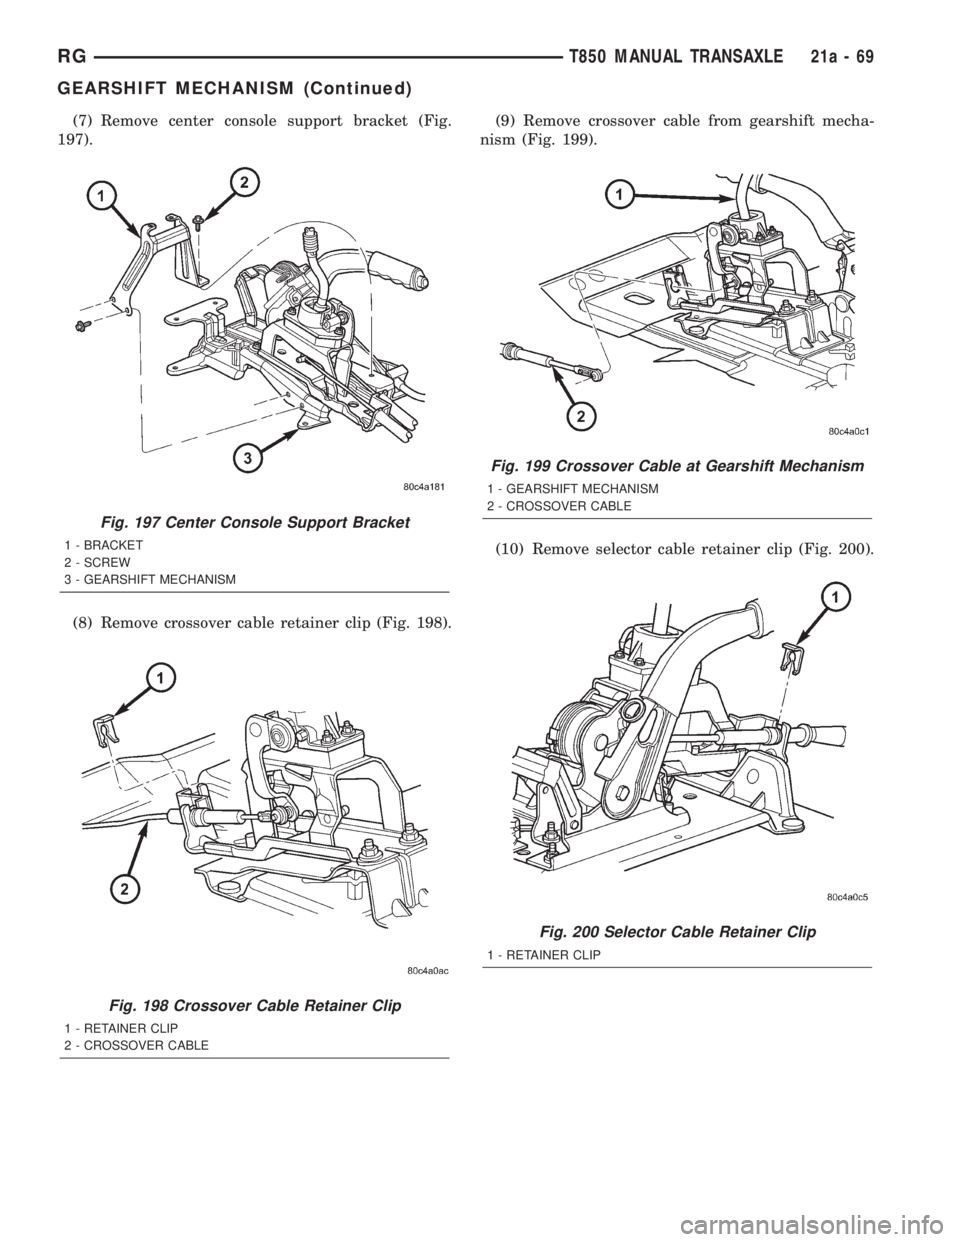 CHRYSLER VOYAGER 2001  Service Manual (7) Remove center console support bracket (Fig.
197).
(8) Remove crossover cable retainer clip (Fig. 198).(9) Remove crossover cable from gearshift mecha-
nism (Fig. 199).
(10) Remove selector cable r